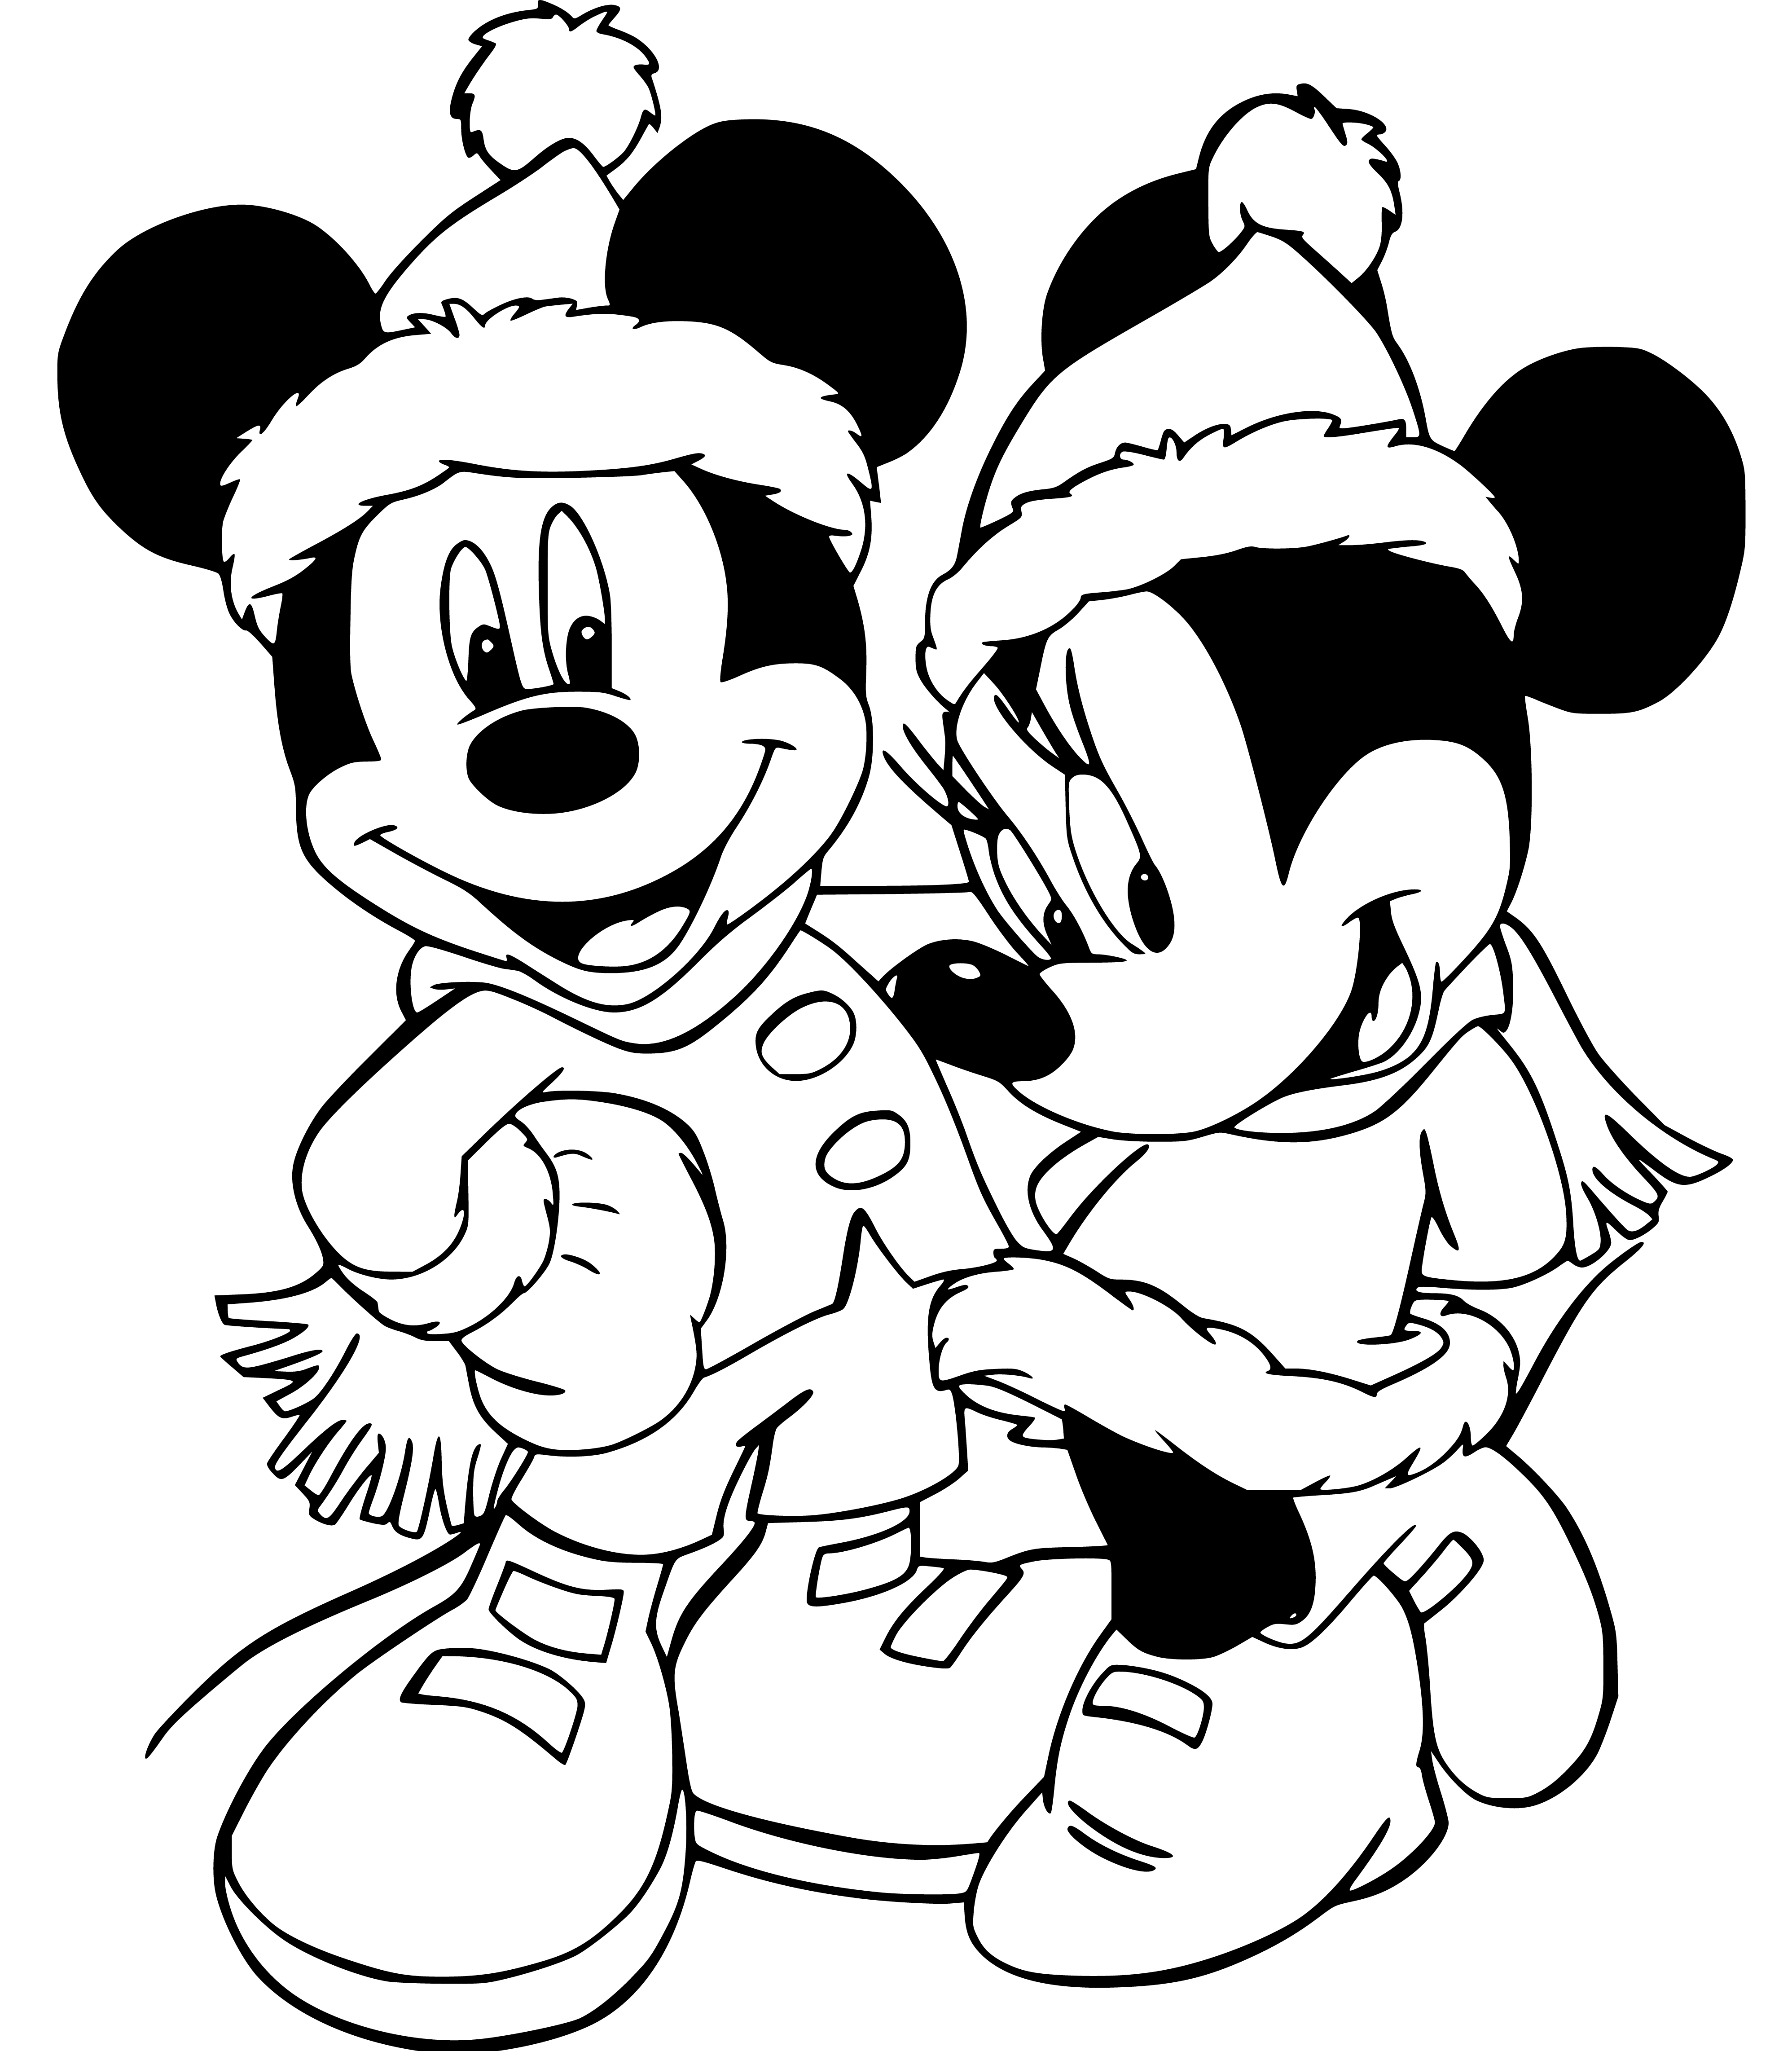 Printable Mickey and Minnie Mouses Coloring Page for kids.